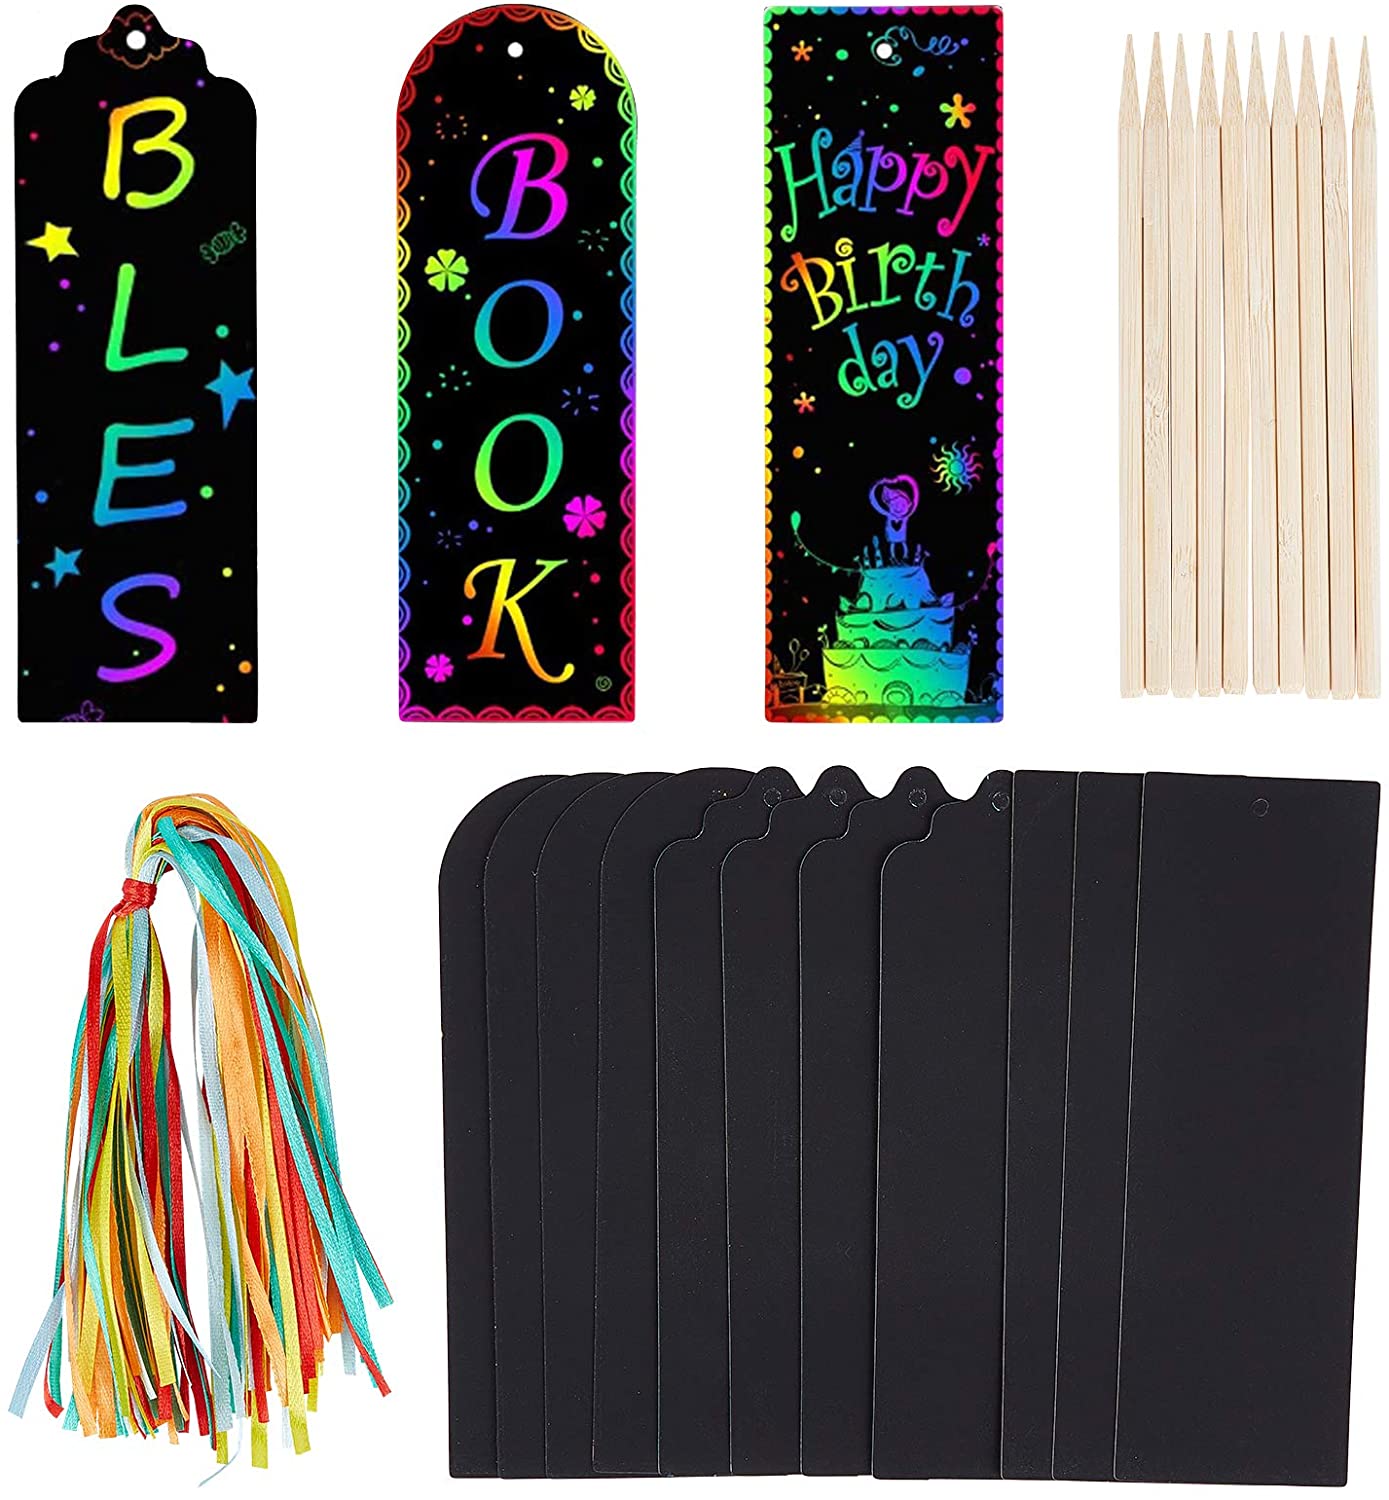 Globleland Bookmarks Making Kit, with Blank Paper Cards with Hole, Rib